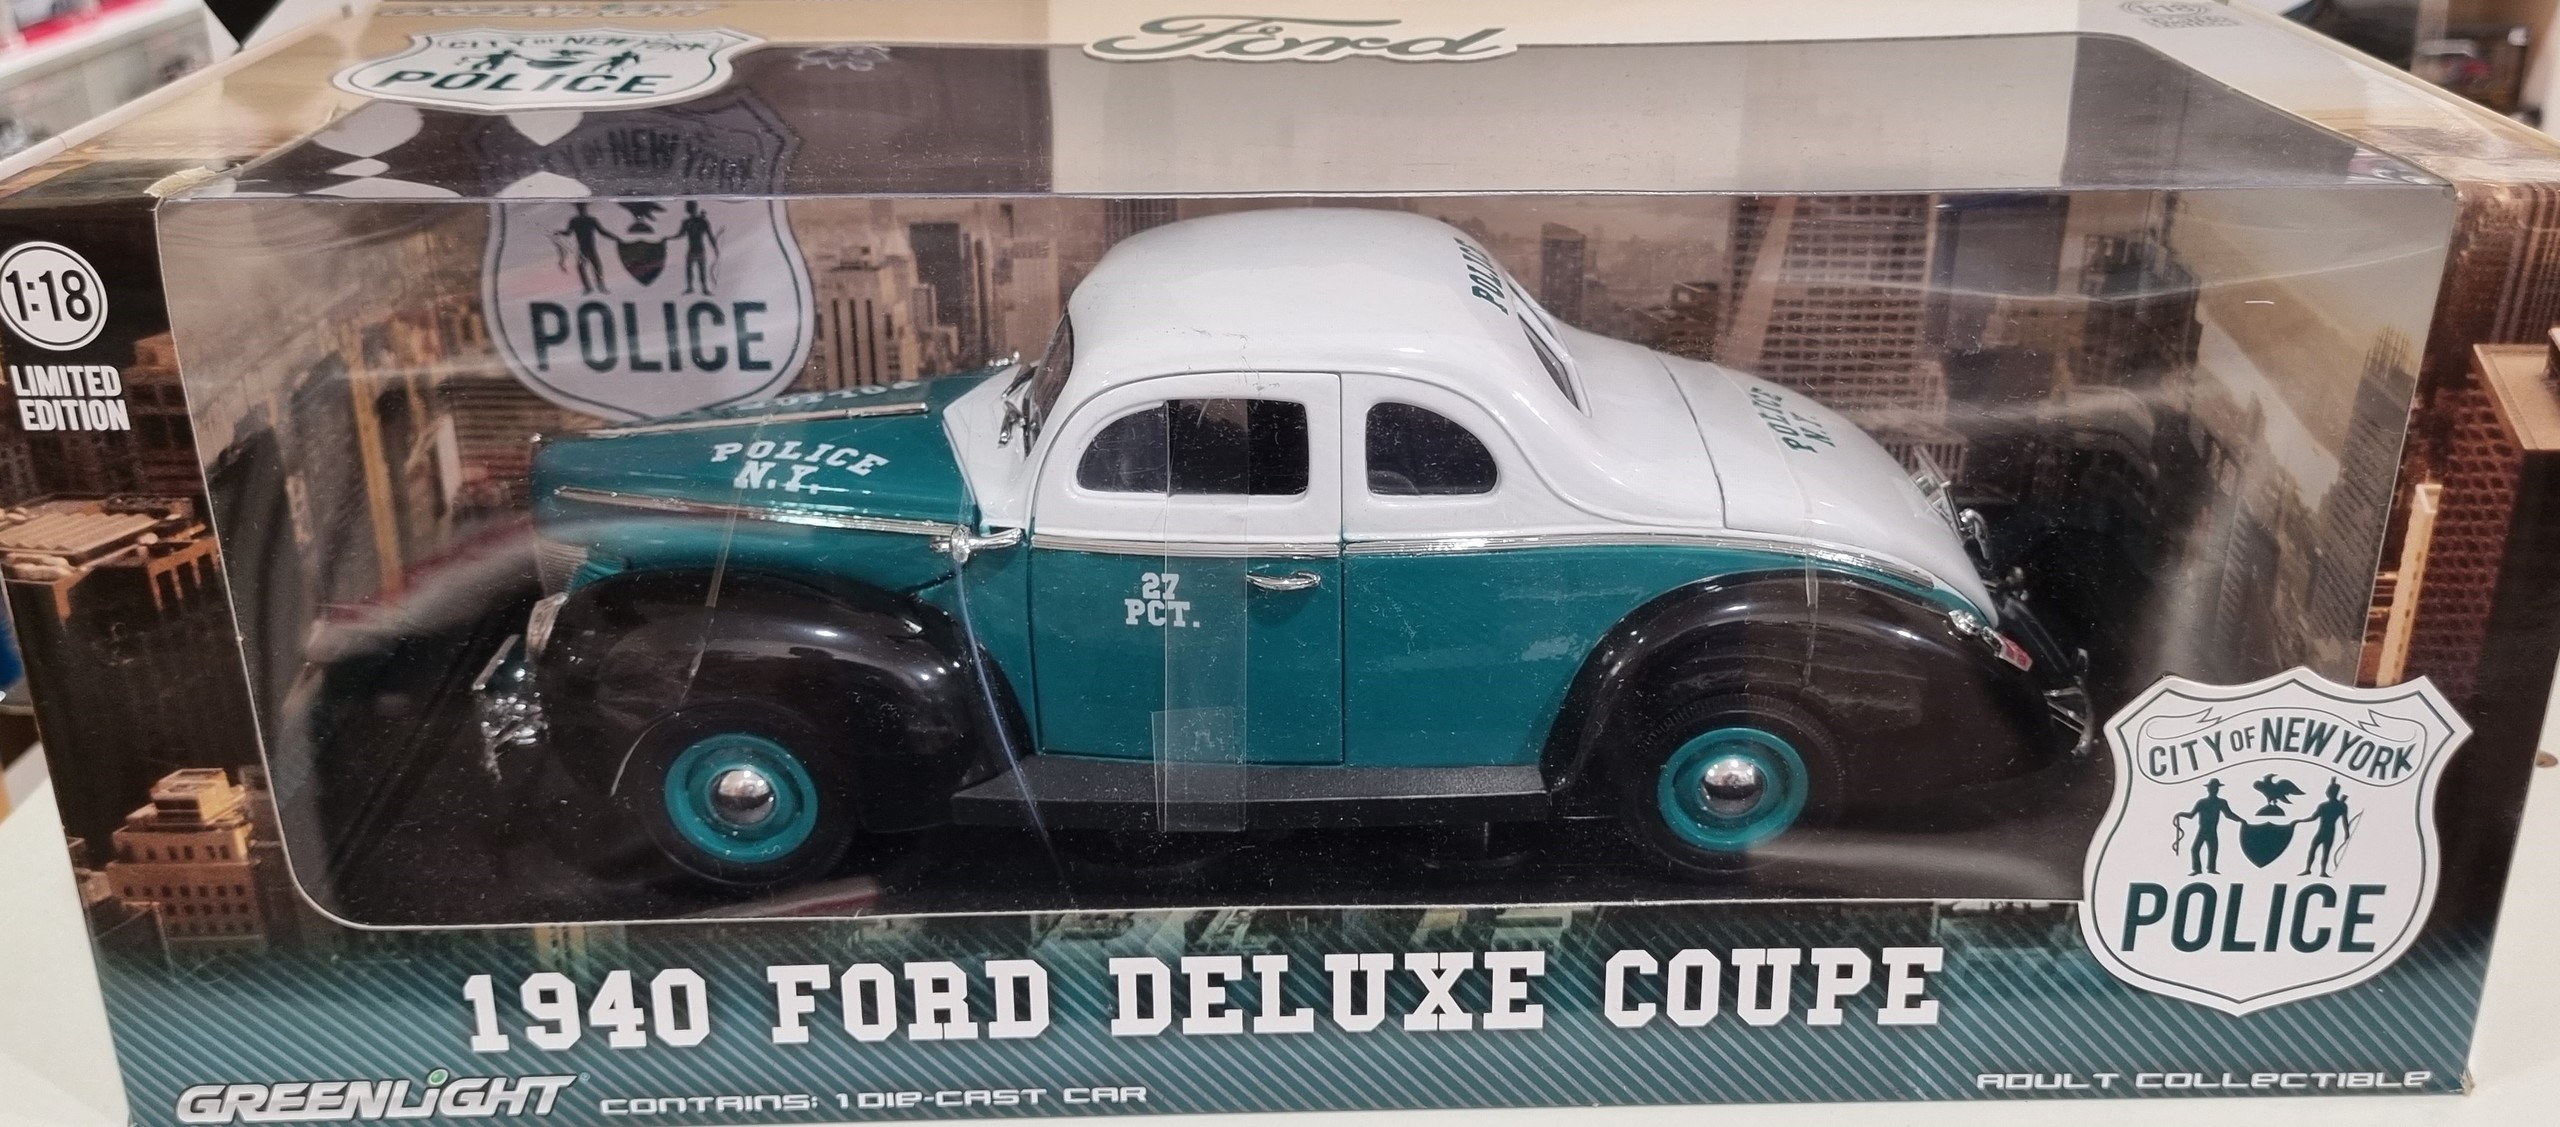 1940 Ford Deluxe Coupe New York Police Car 1/18 Greenlight